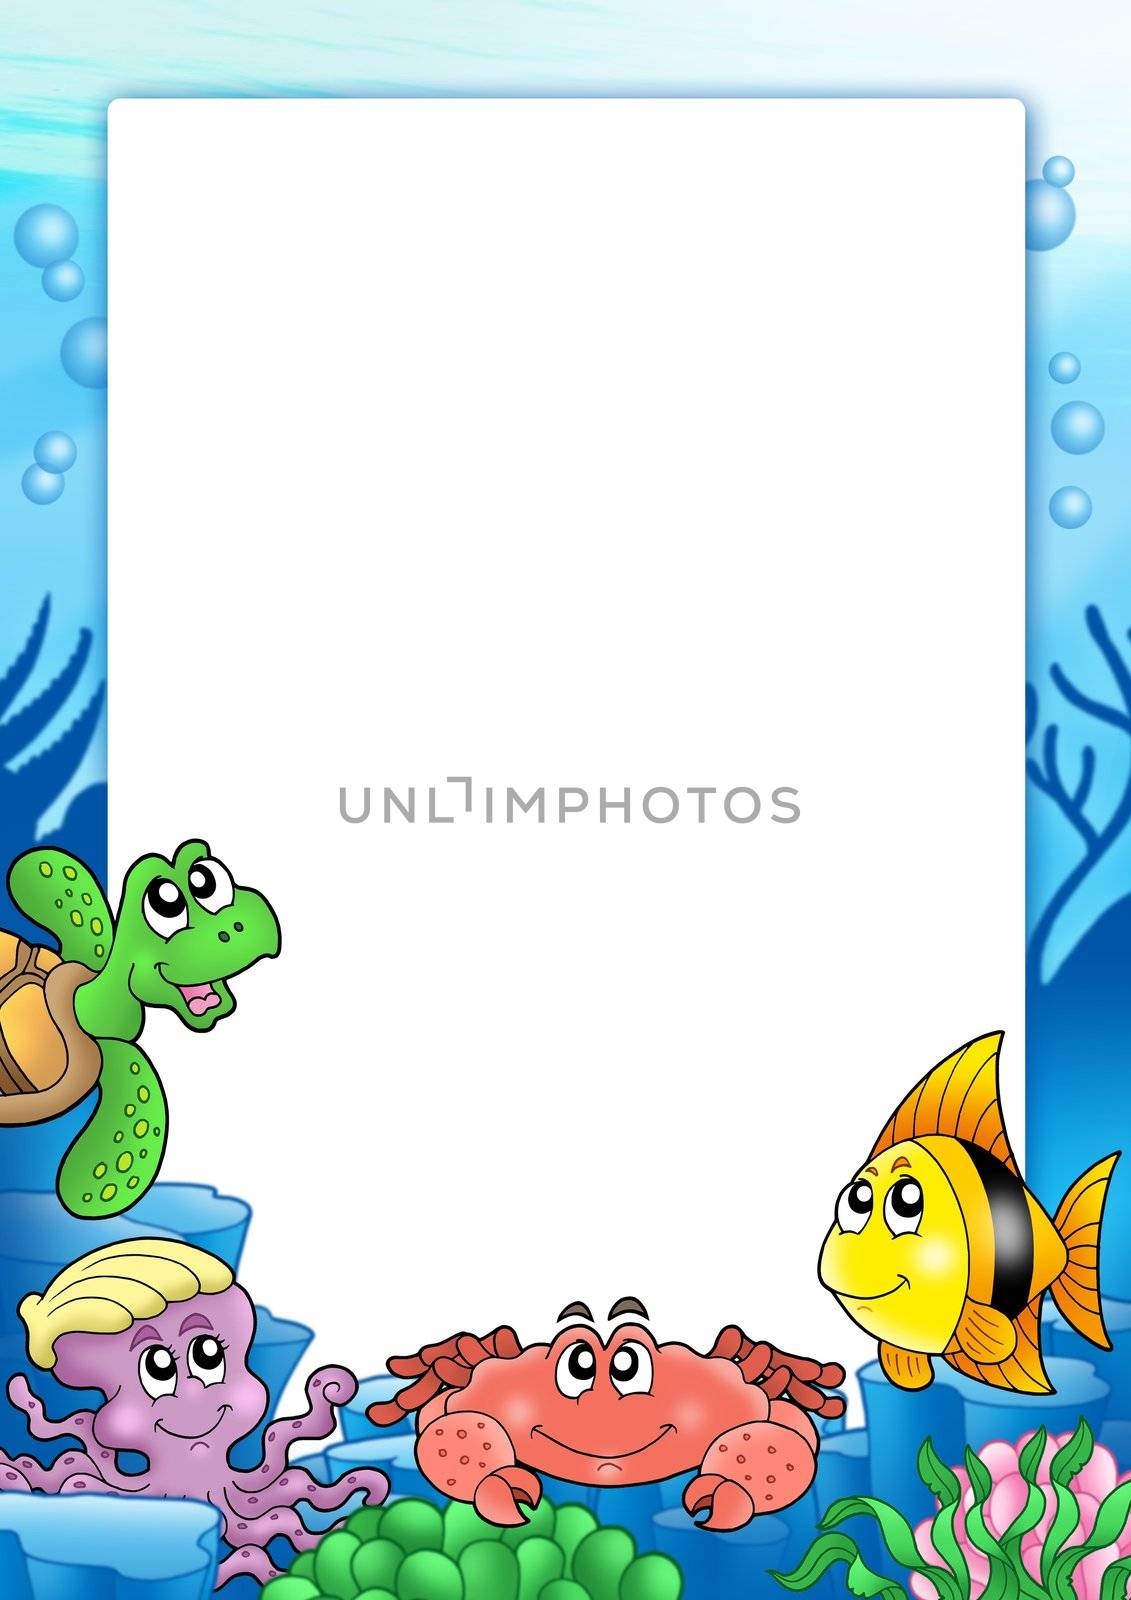 Frame with various sea animals - color illustration.